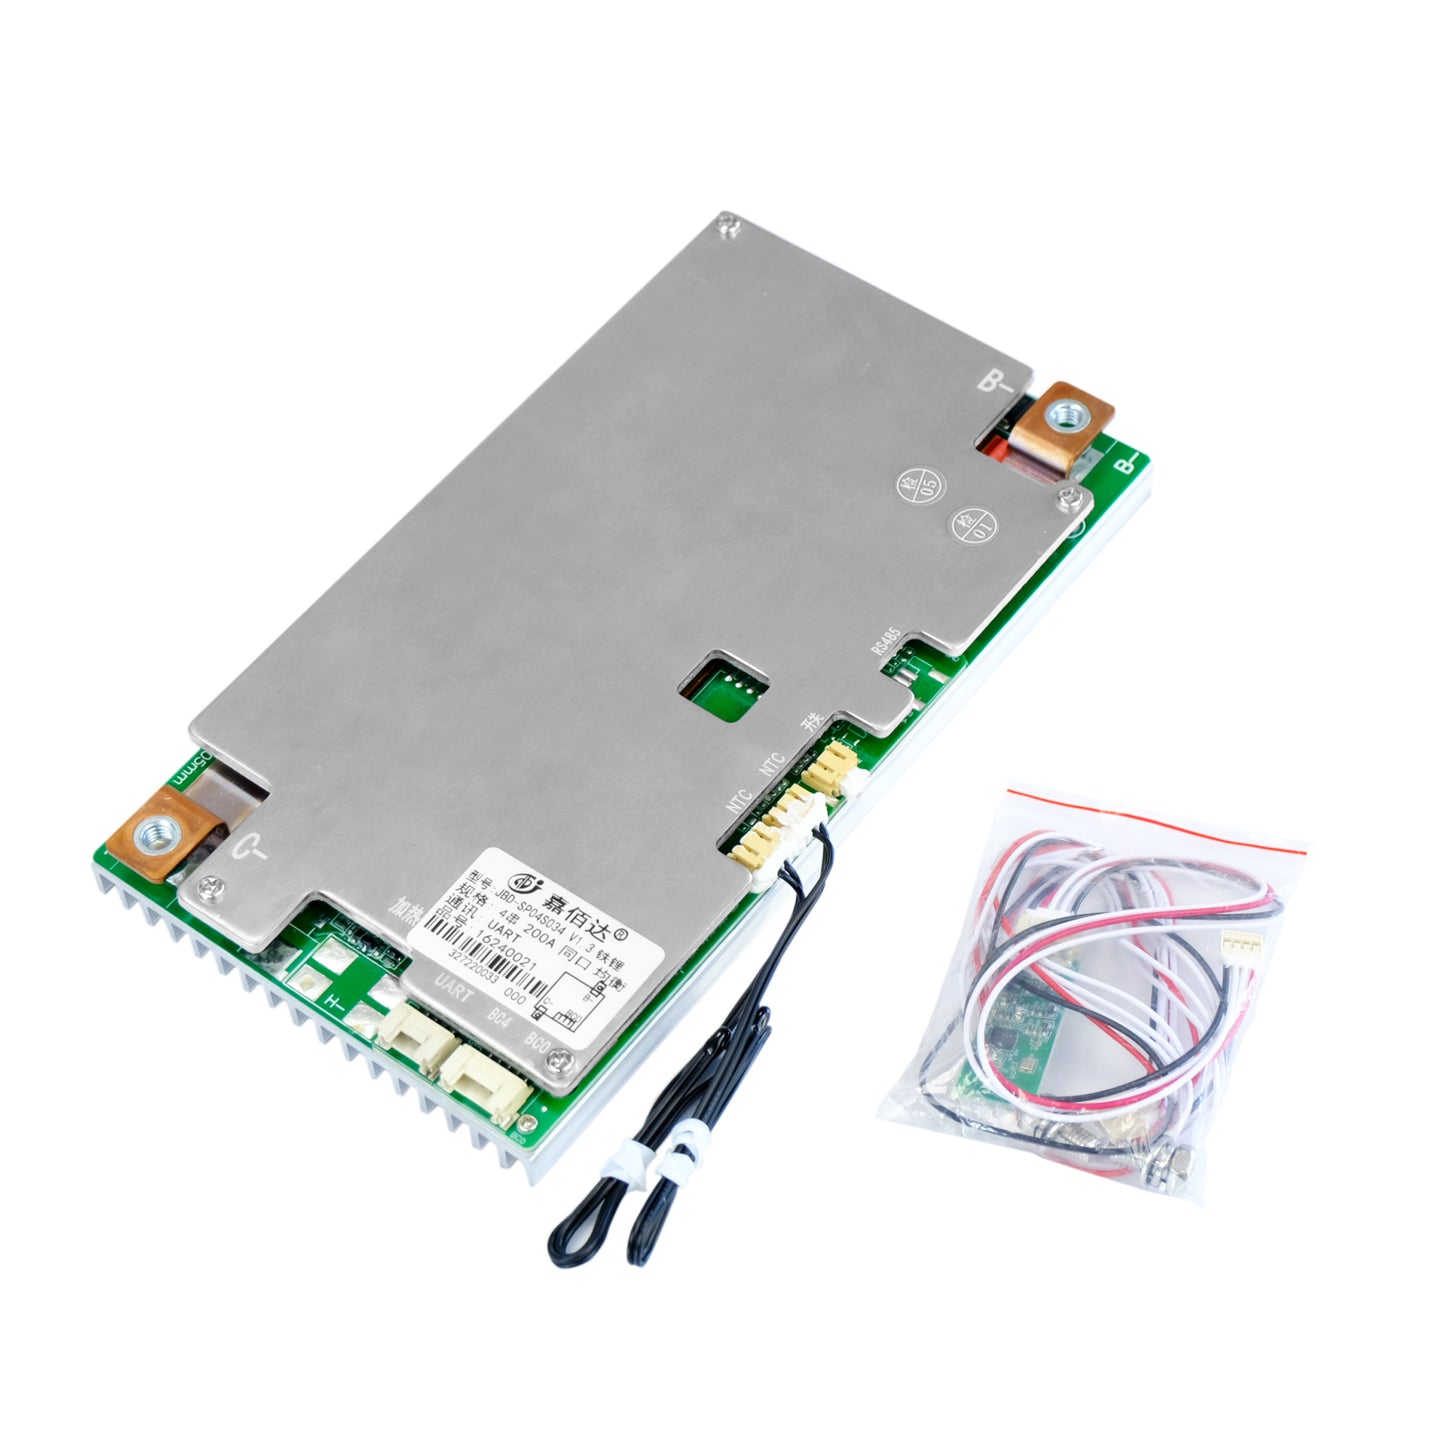 JBD Smart BMS 4S Lifepo4 200A Free Bluetooth Heating Function UART Lithium Battery Protection Balance Board 12V With Balancer